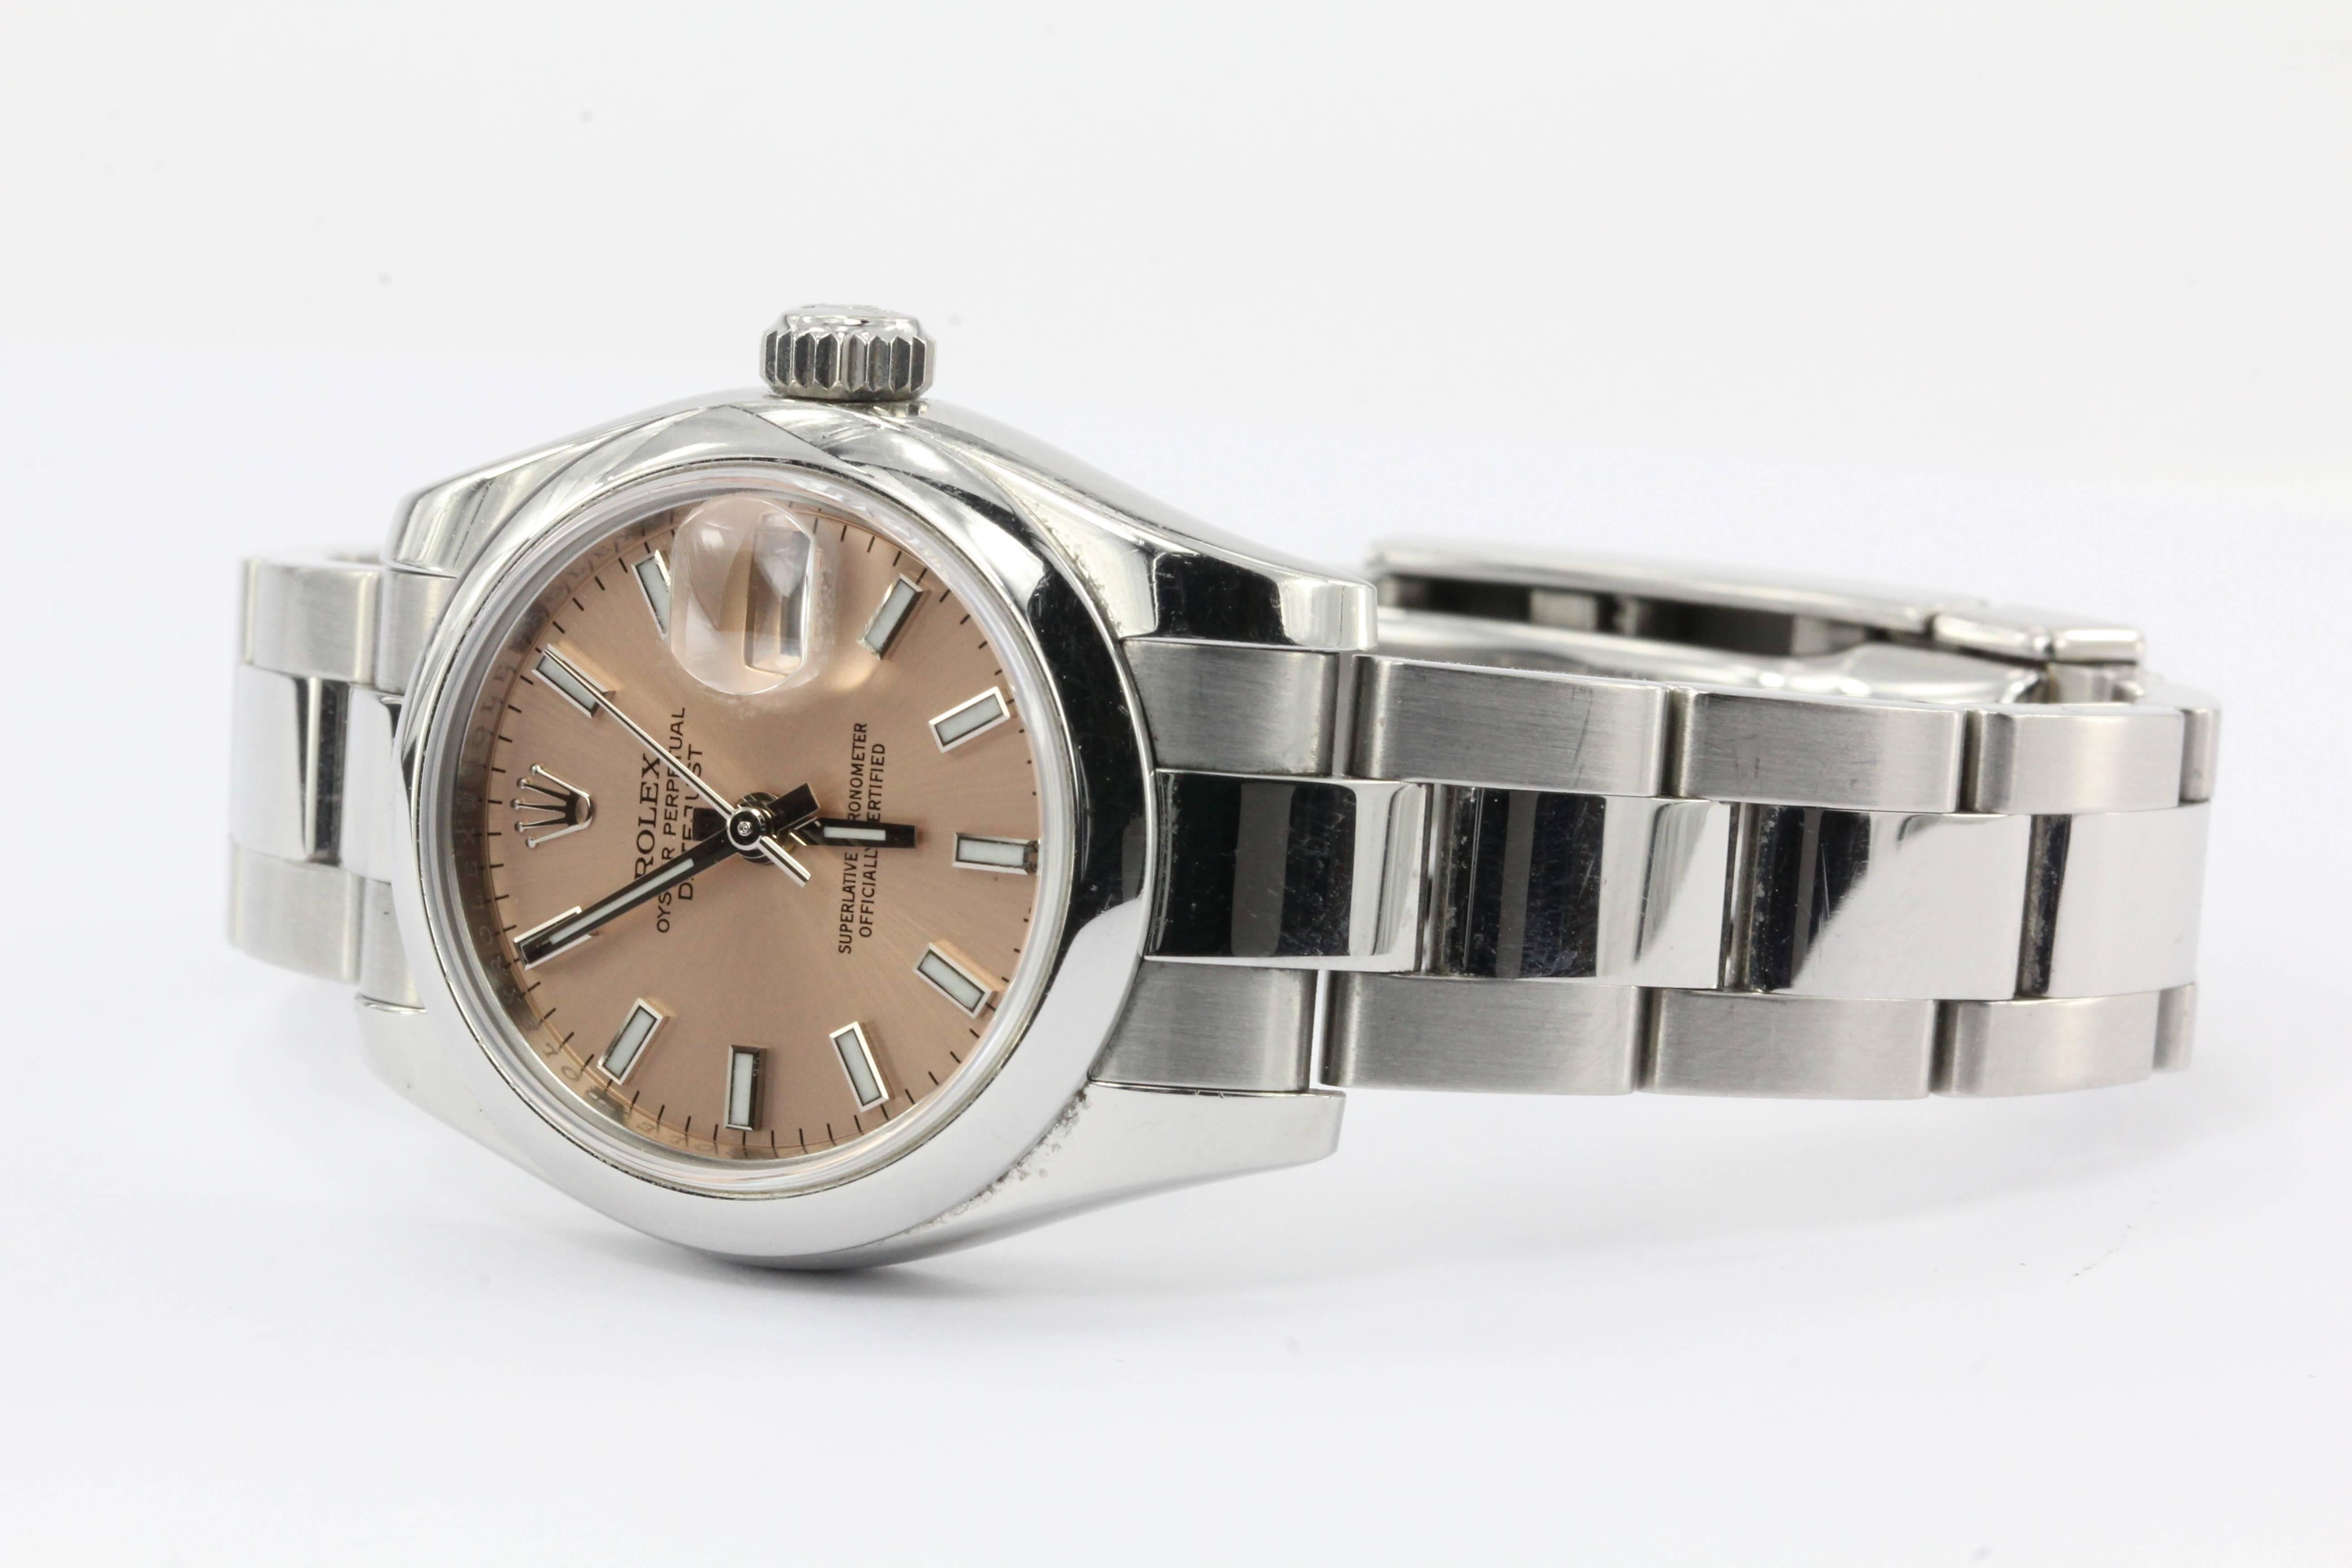 Rolex Ladies Datejust 179160 Stainless Steel custom PINK DIAL in box. The watch is in excellent gently used estate condition and running great. The watch comes in its original case and box, with its tag, paperwork and receipts. The watch dates from